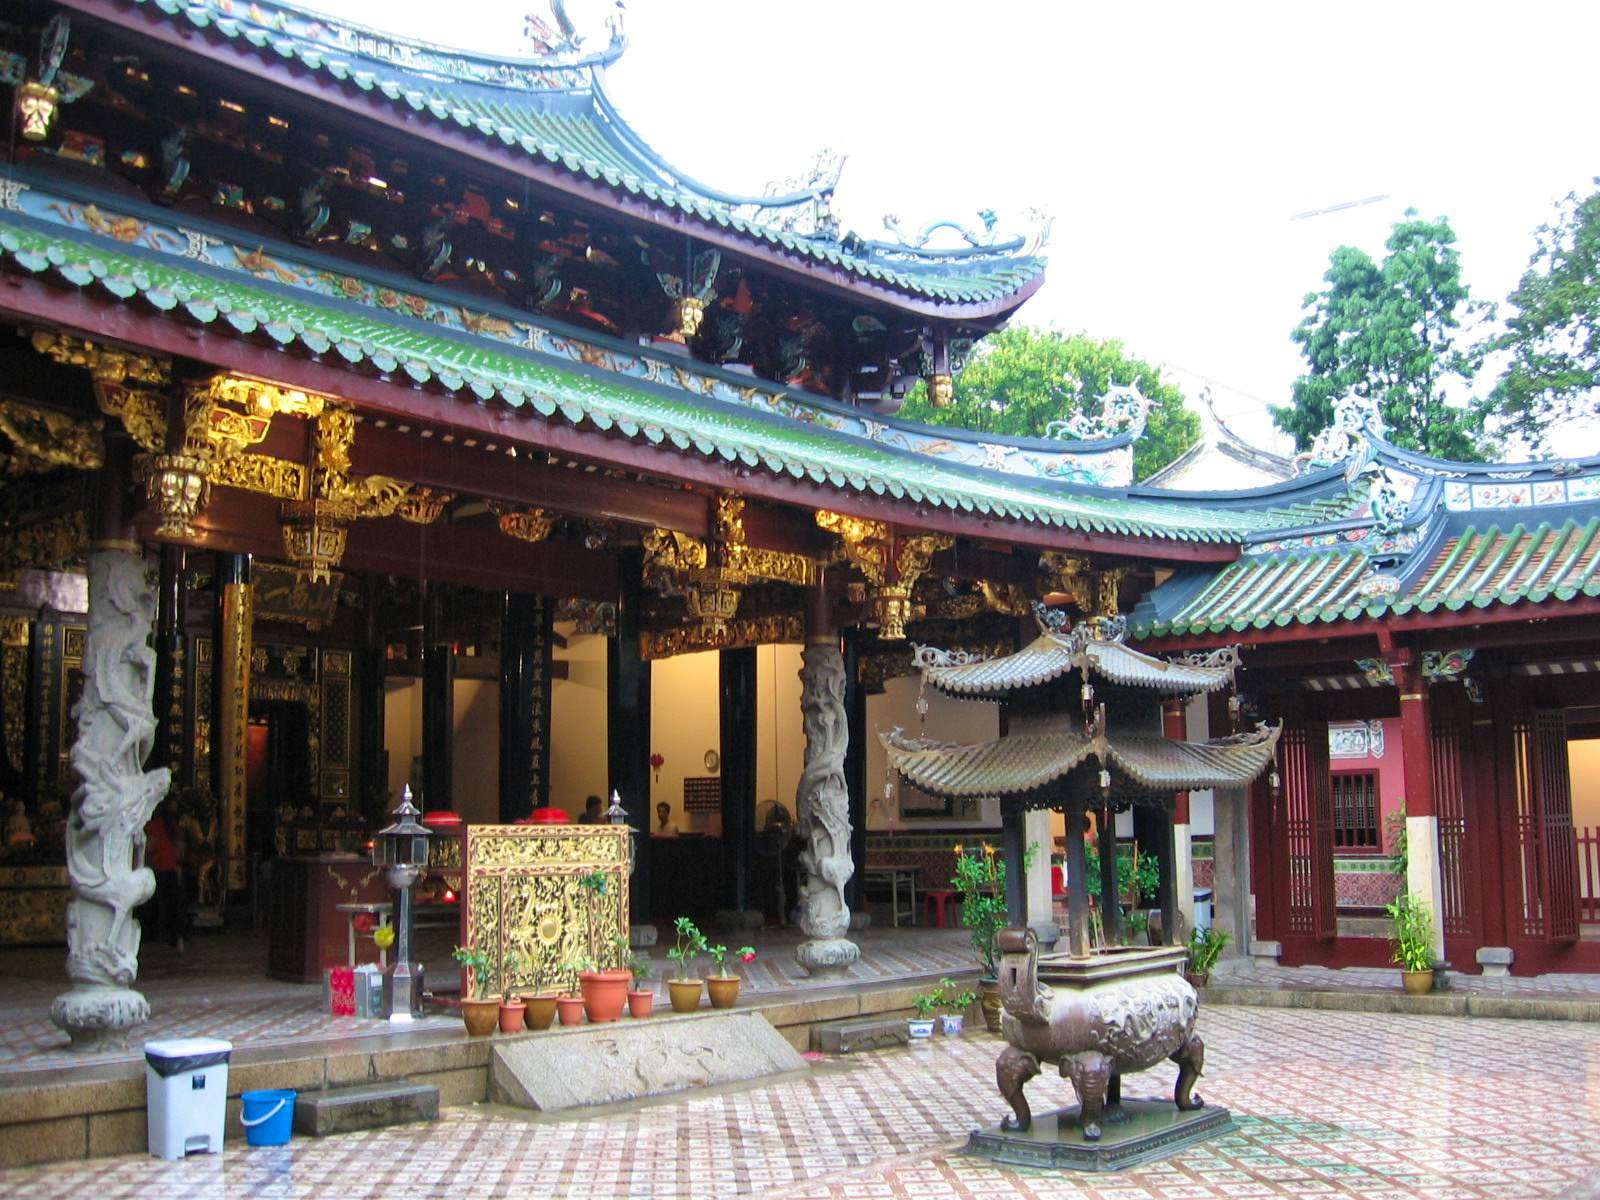 Head to the oldest and most important temple of the Hokkien people - Thian Hock Keng Temple